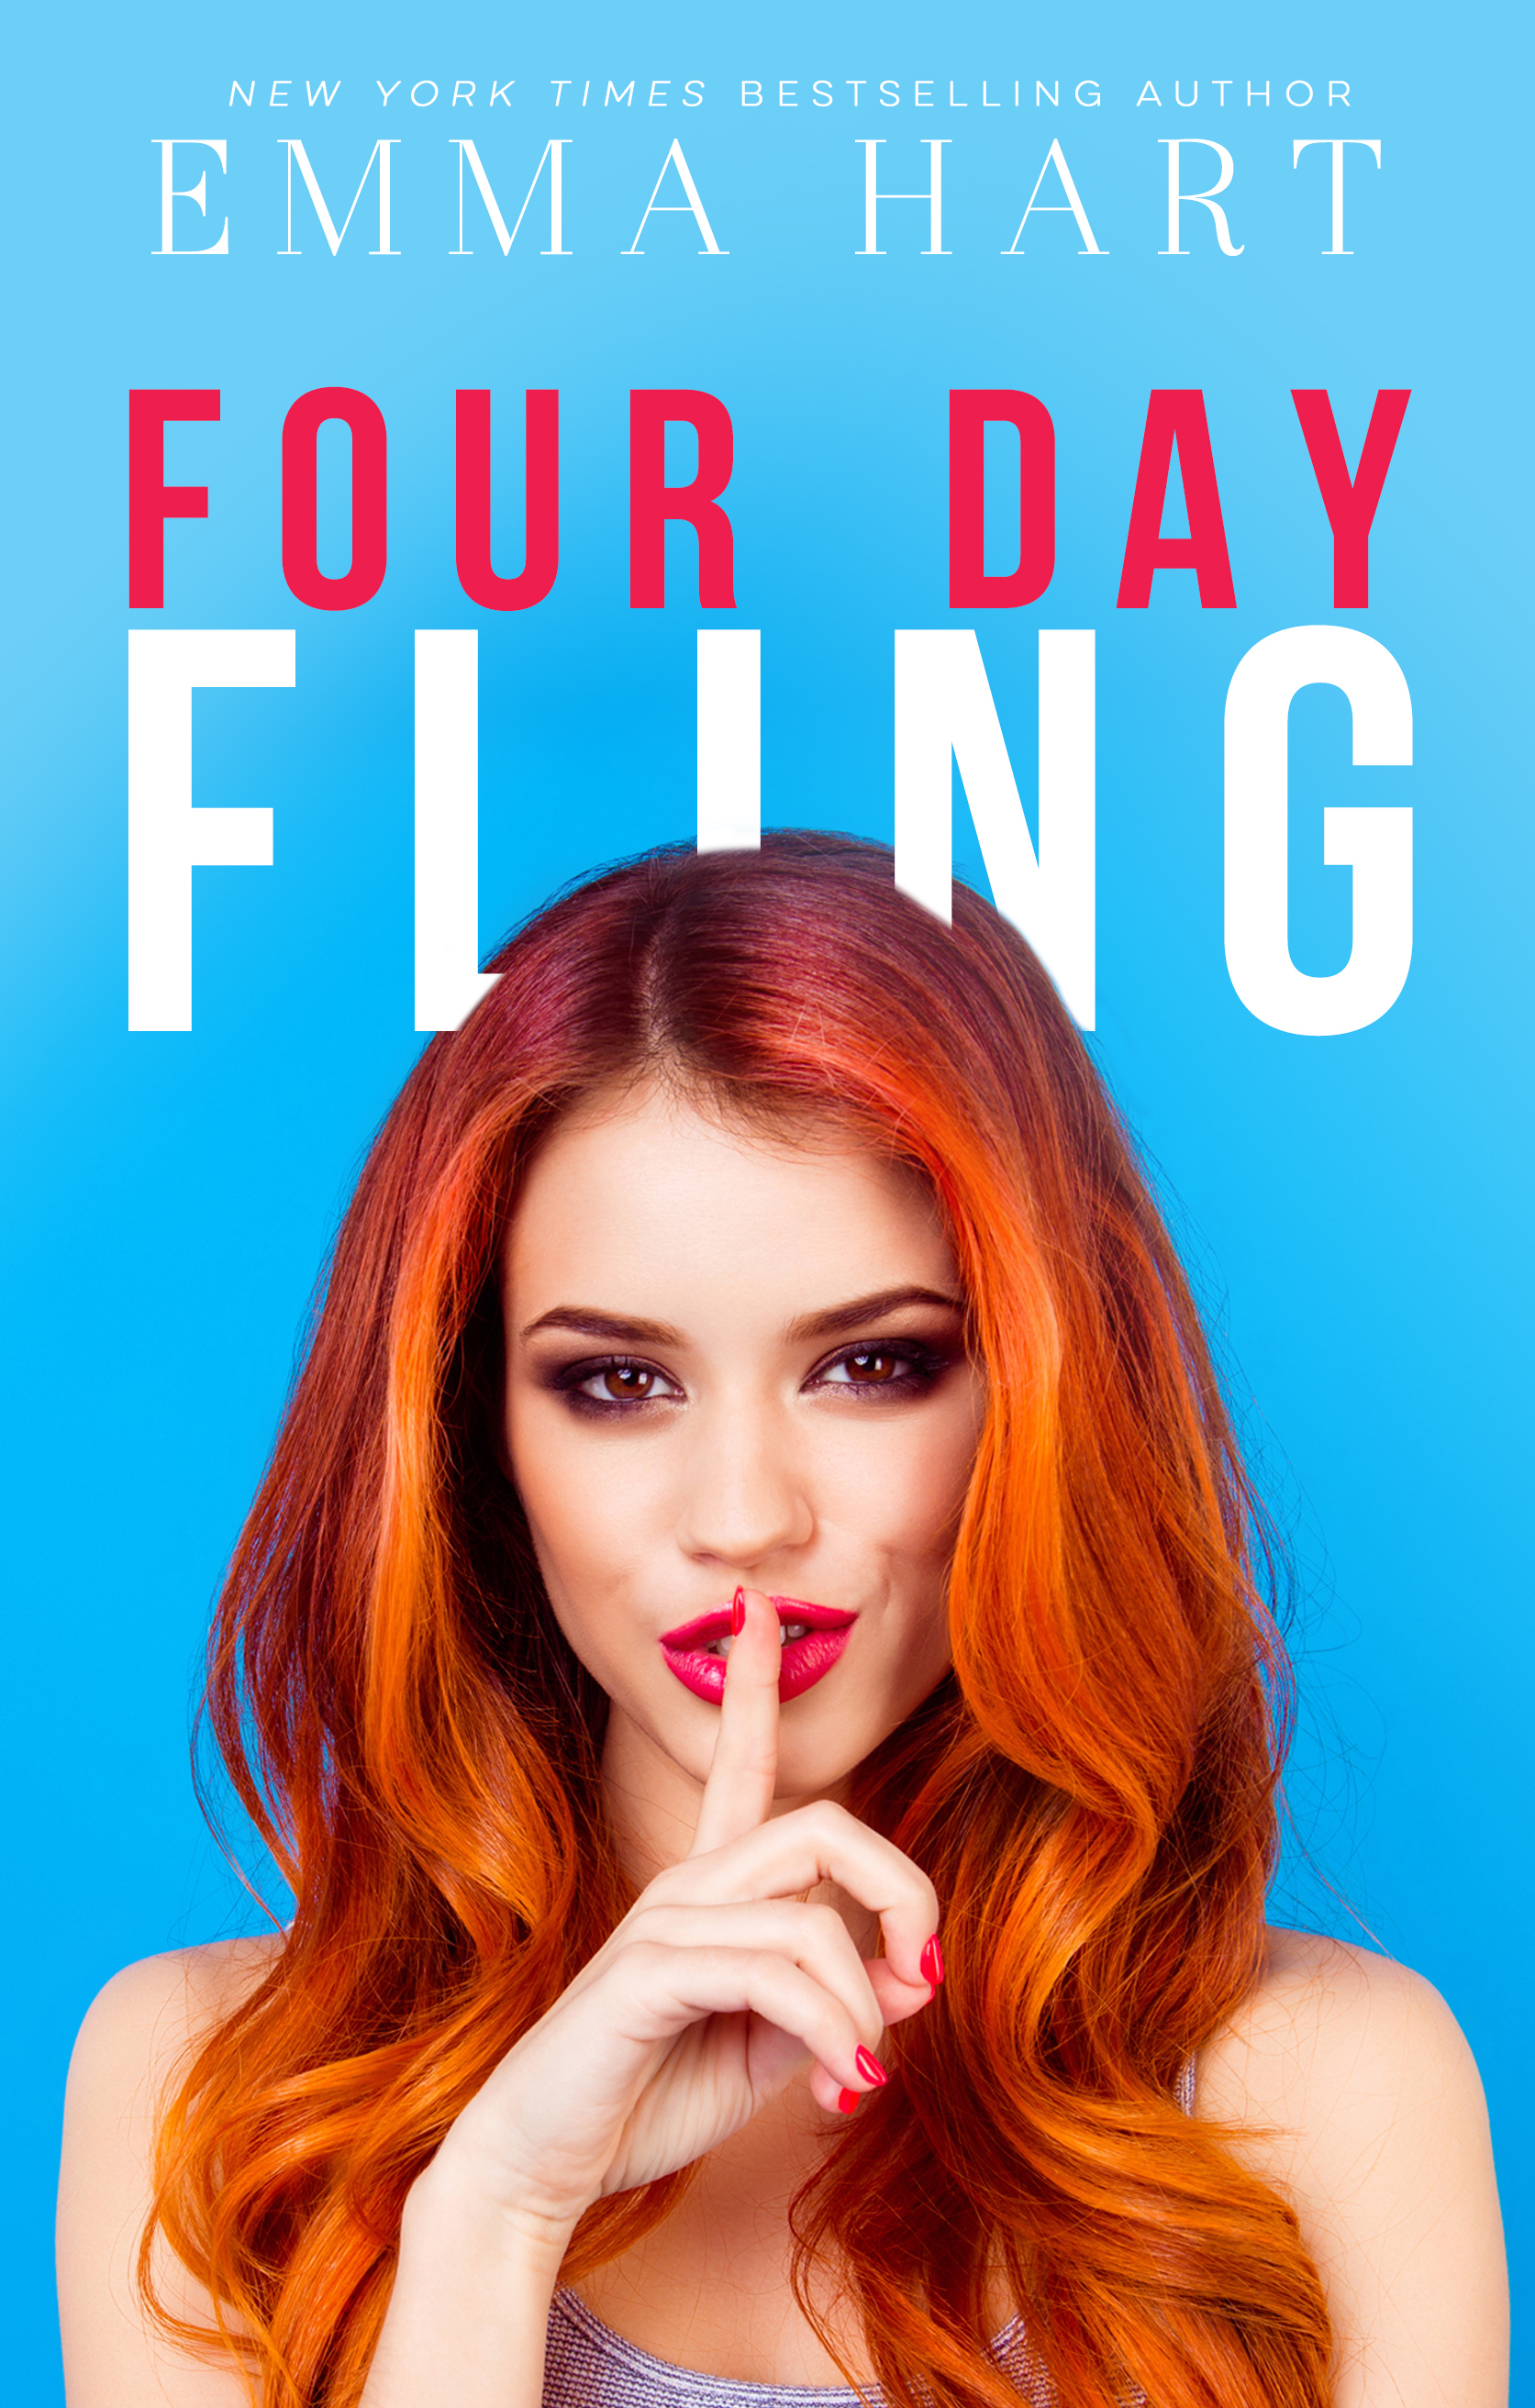 Four Day Fling by Emma Hart